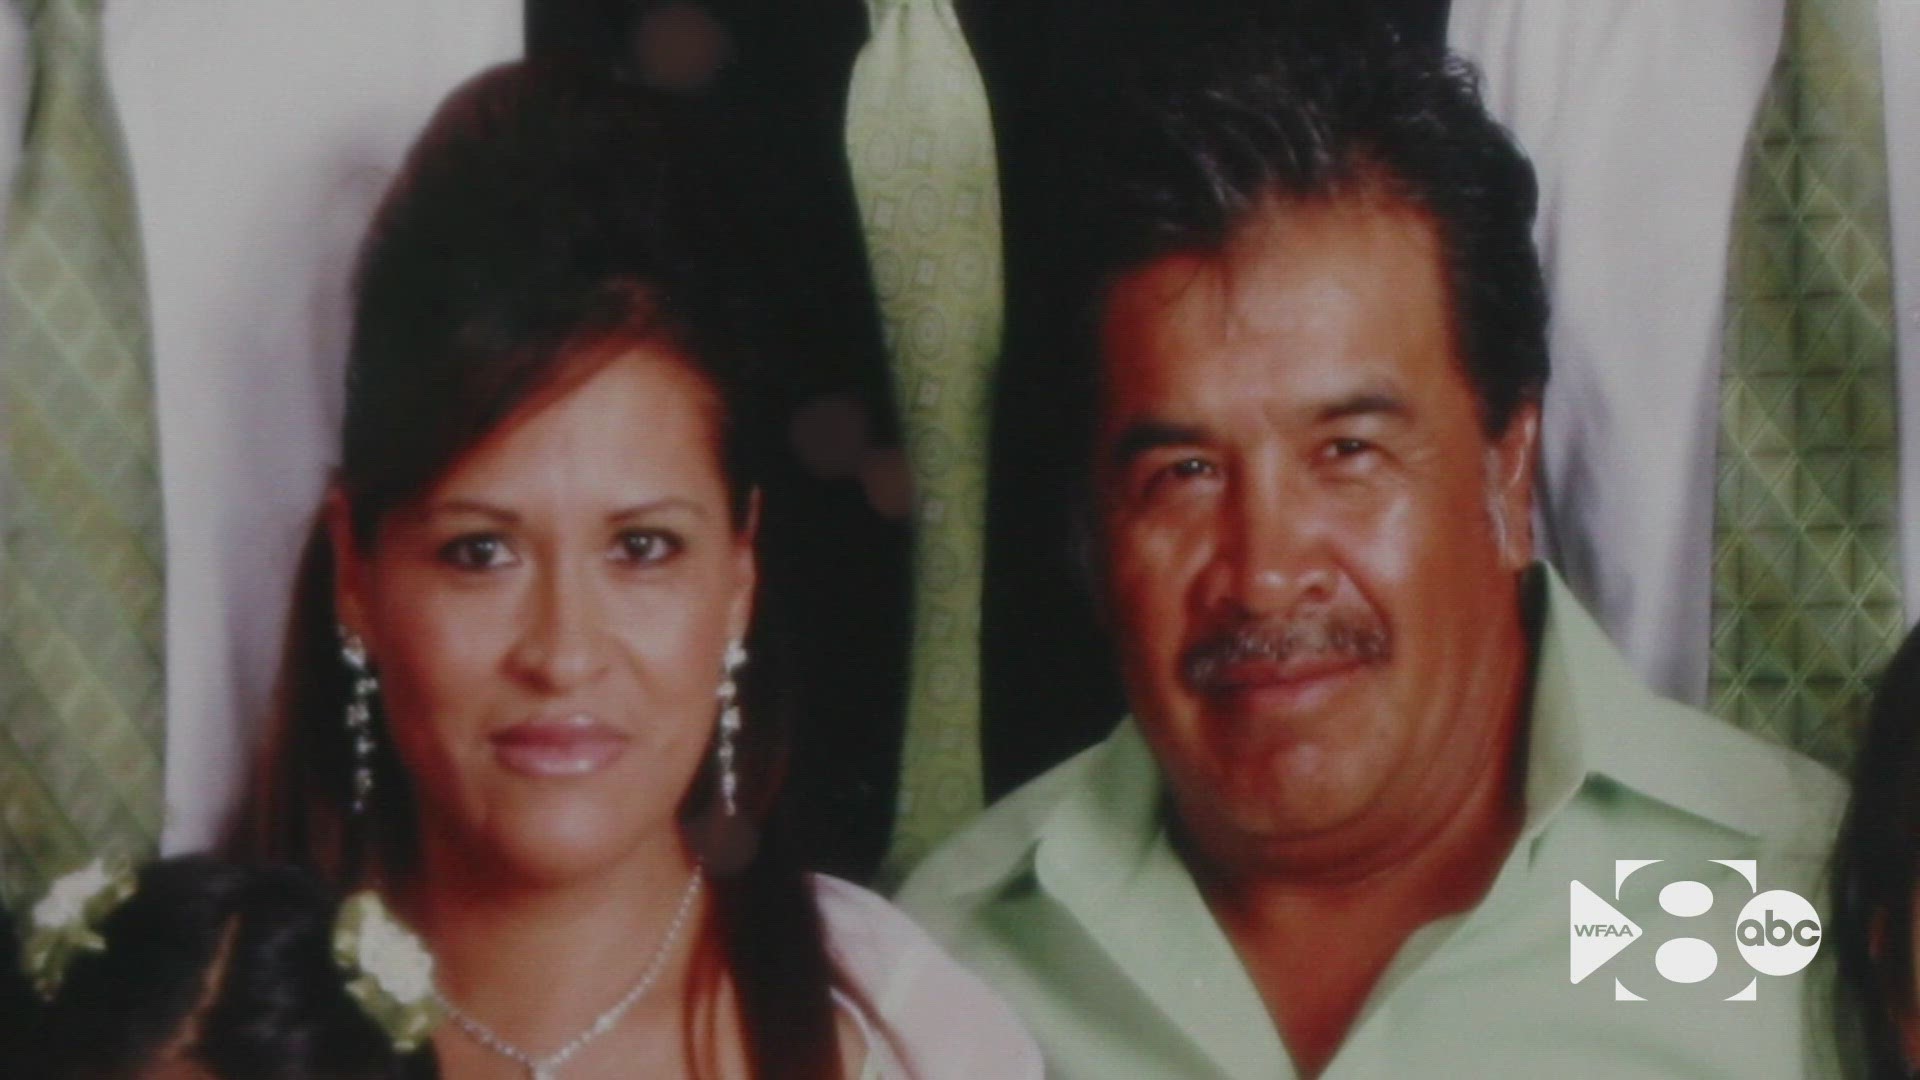 Unlike some of the other cases WFAA has profiled, police say the murder of Maria Corona is believed solved, but the suspected perpetrator is still out there.